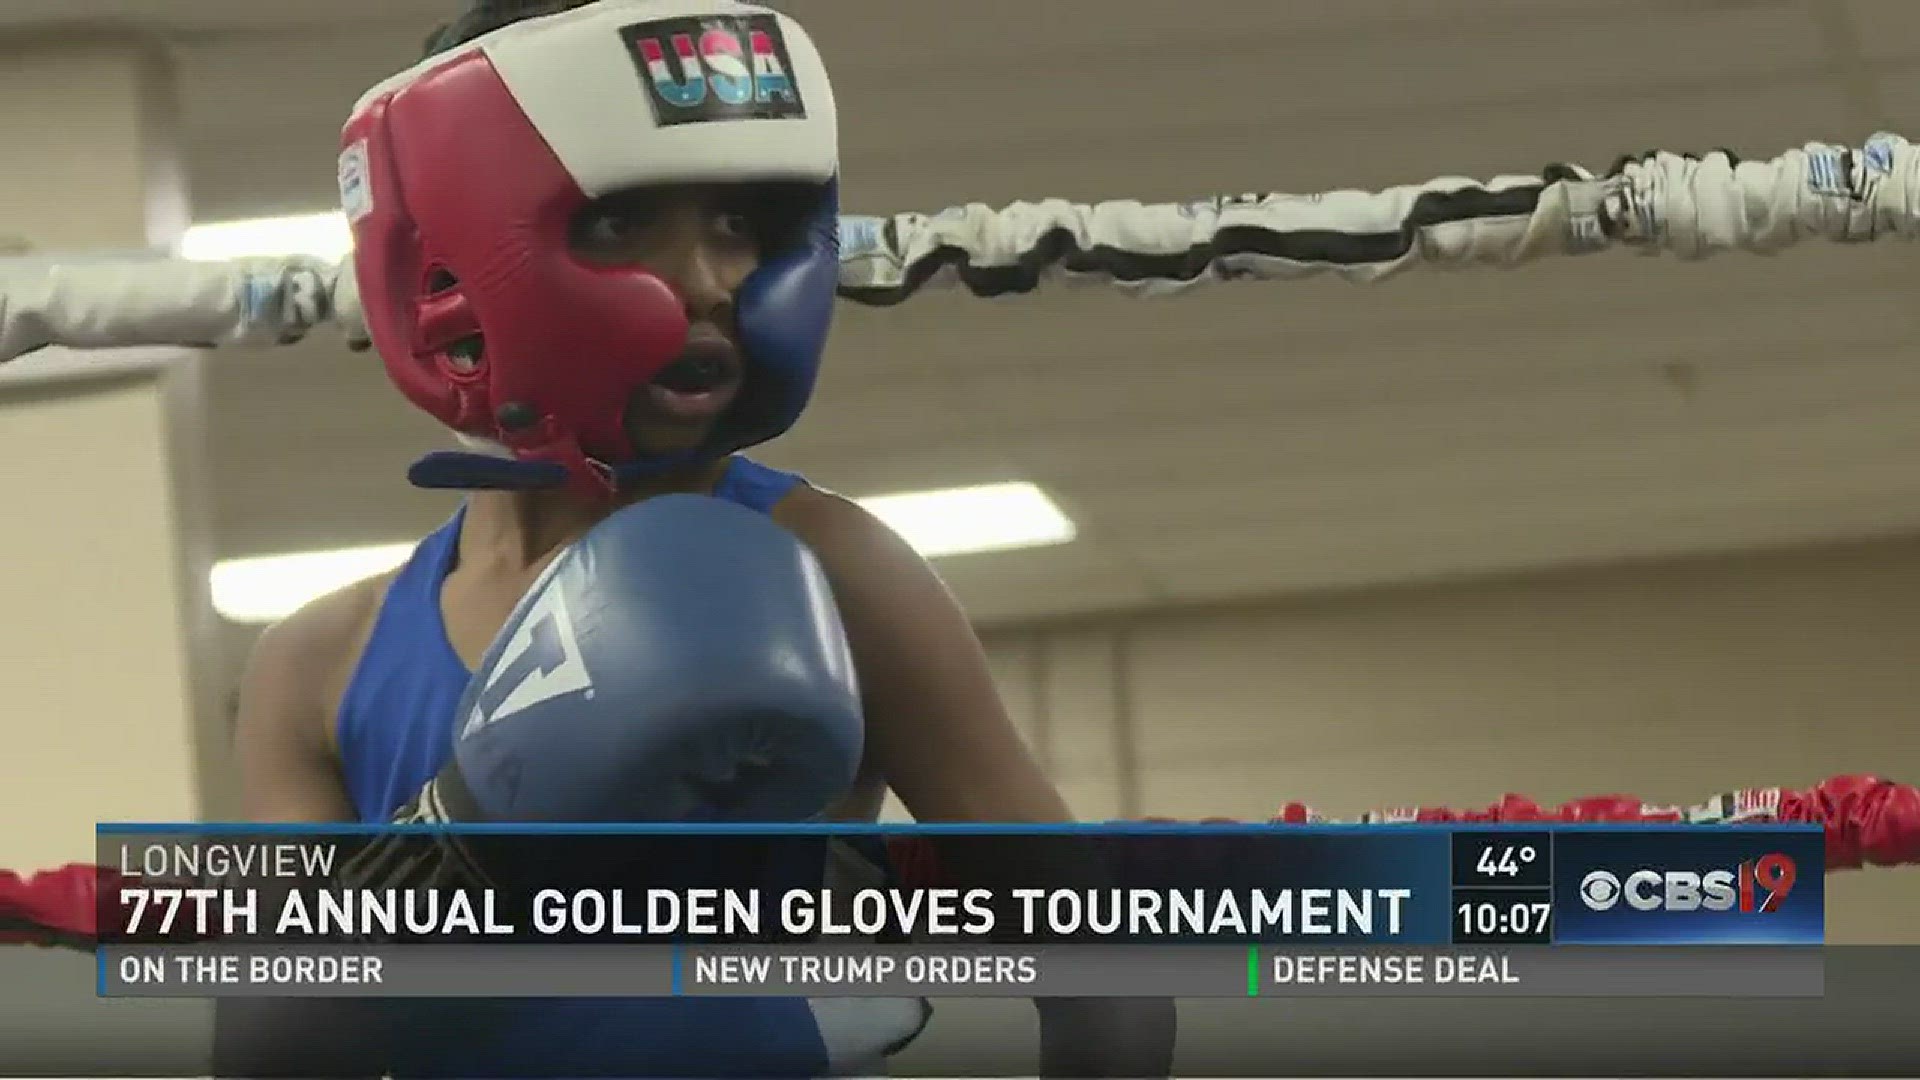 Longview boxers compete in the 77th Golden Gloves tournament cbs19